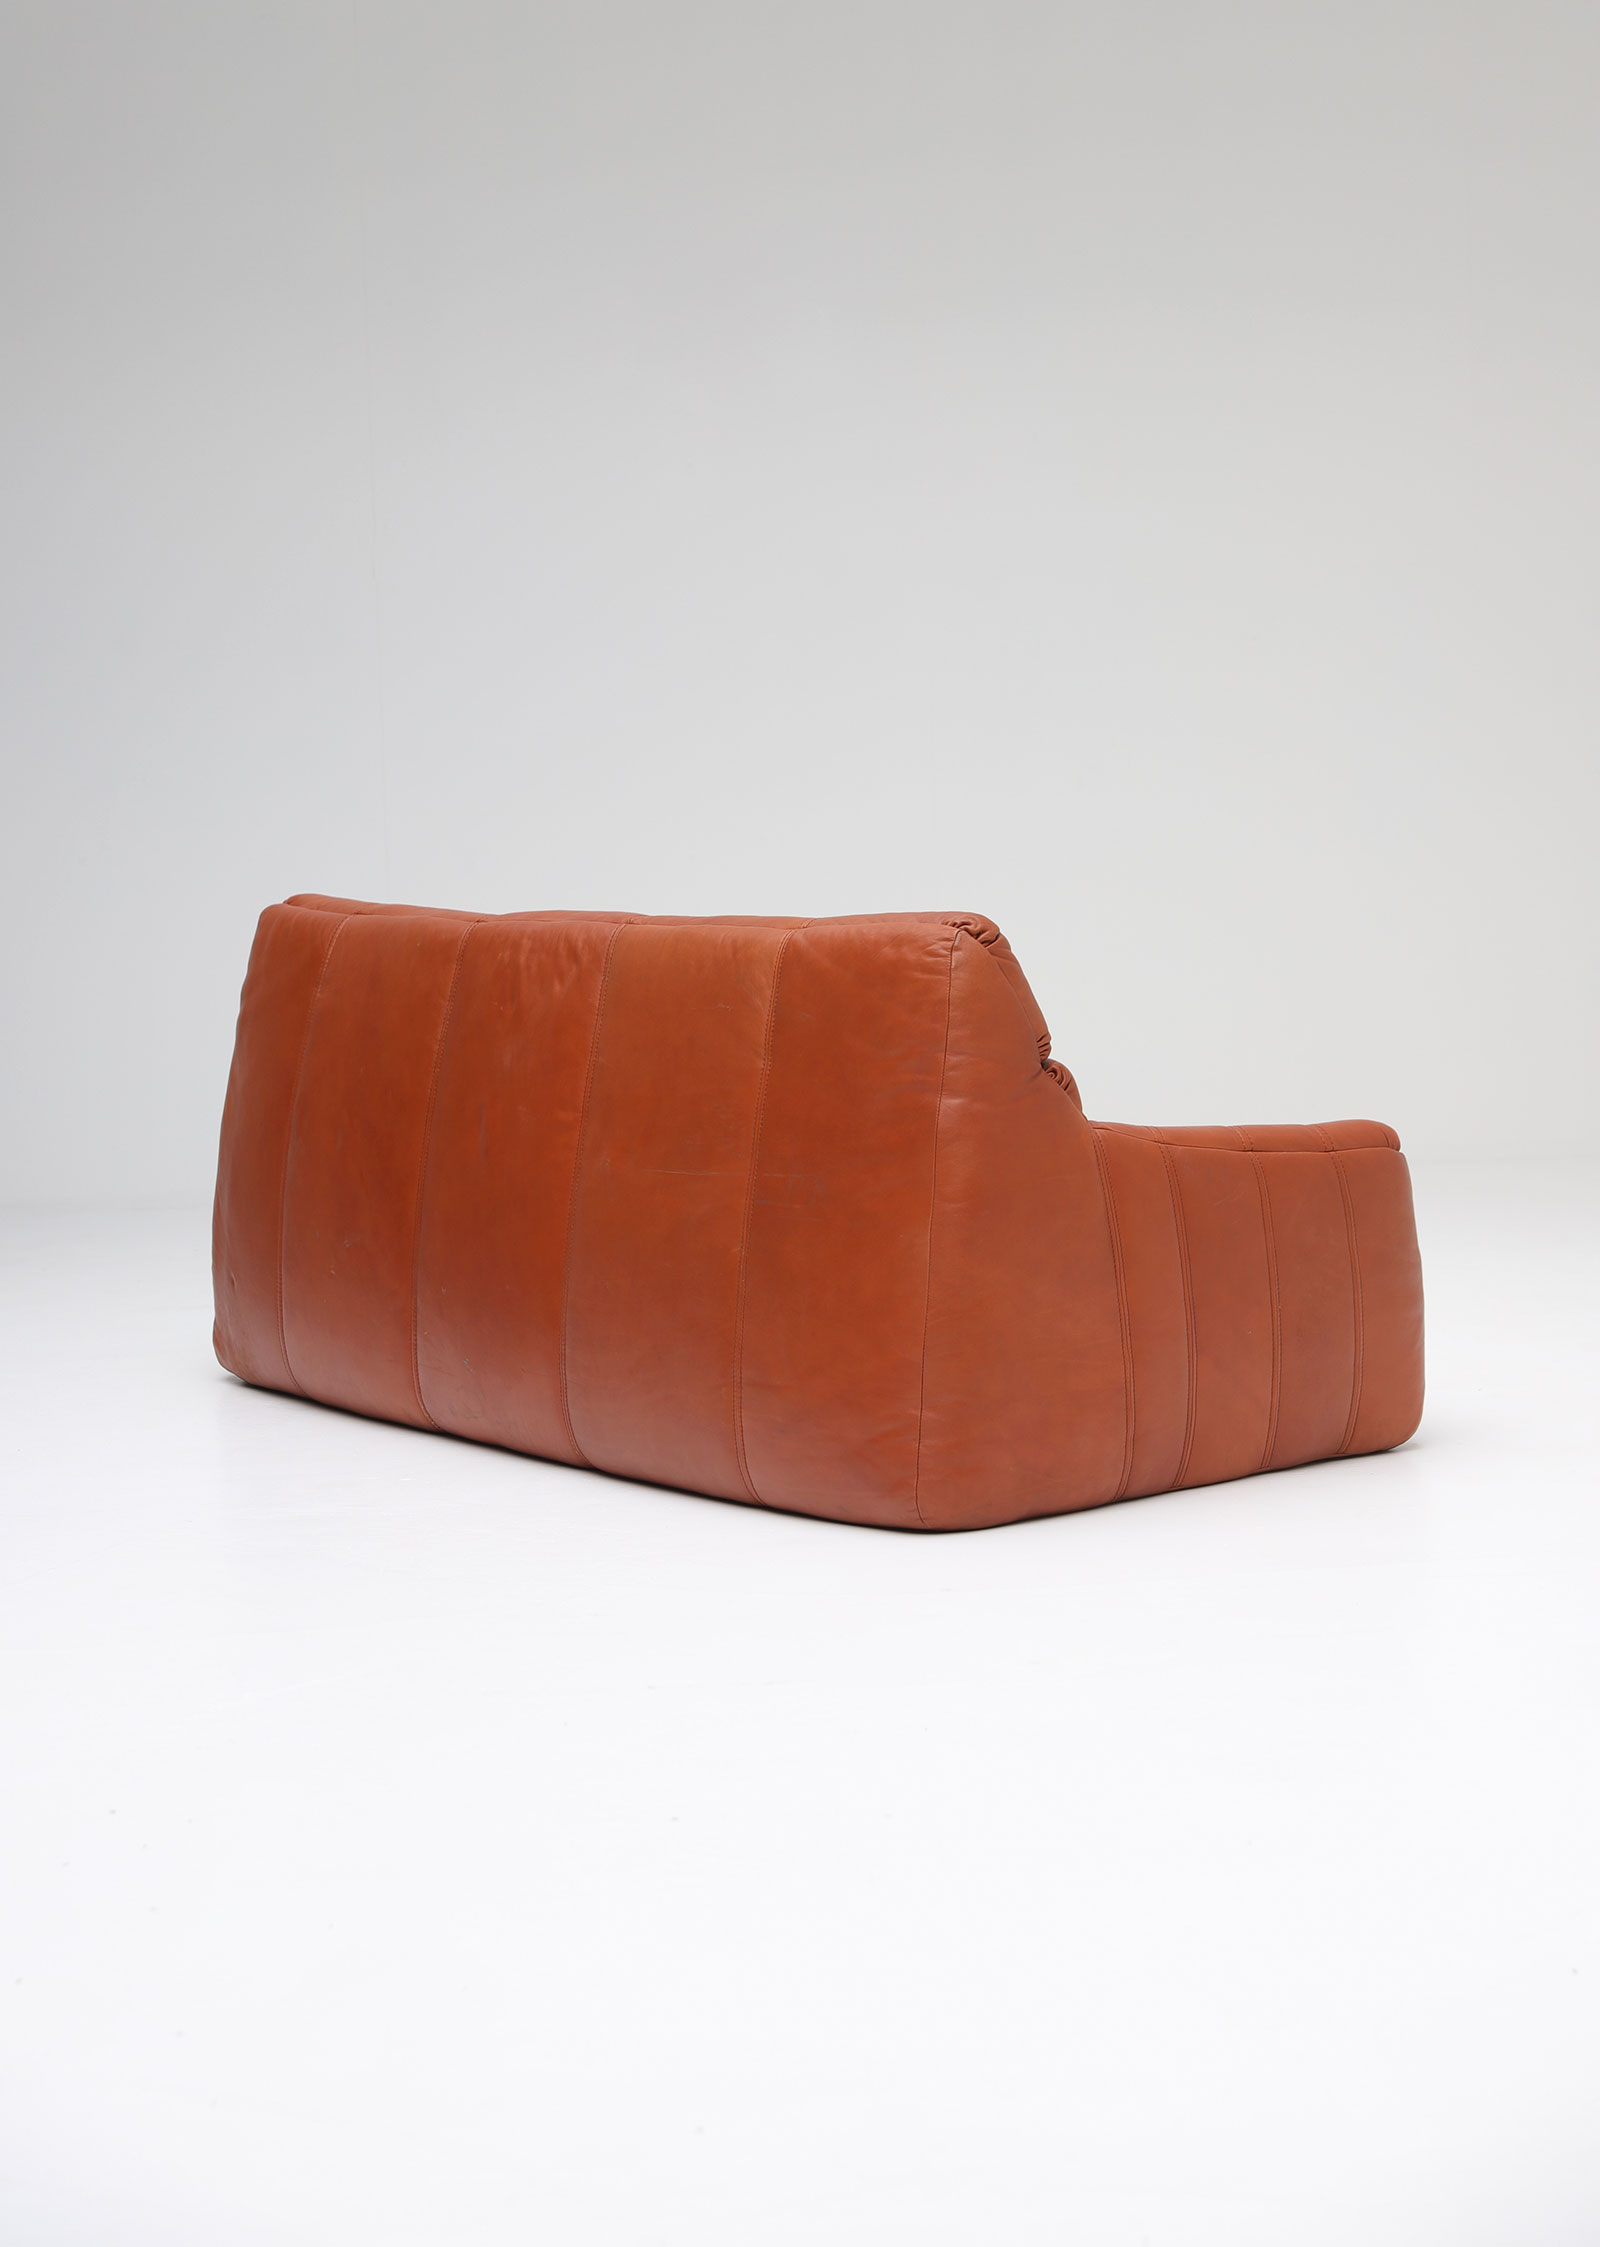 1970s Rolf Benz Leather Sofa image 5